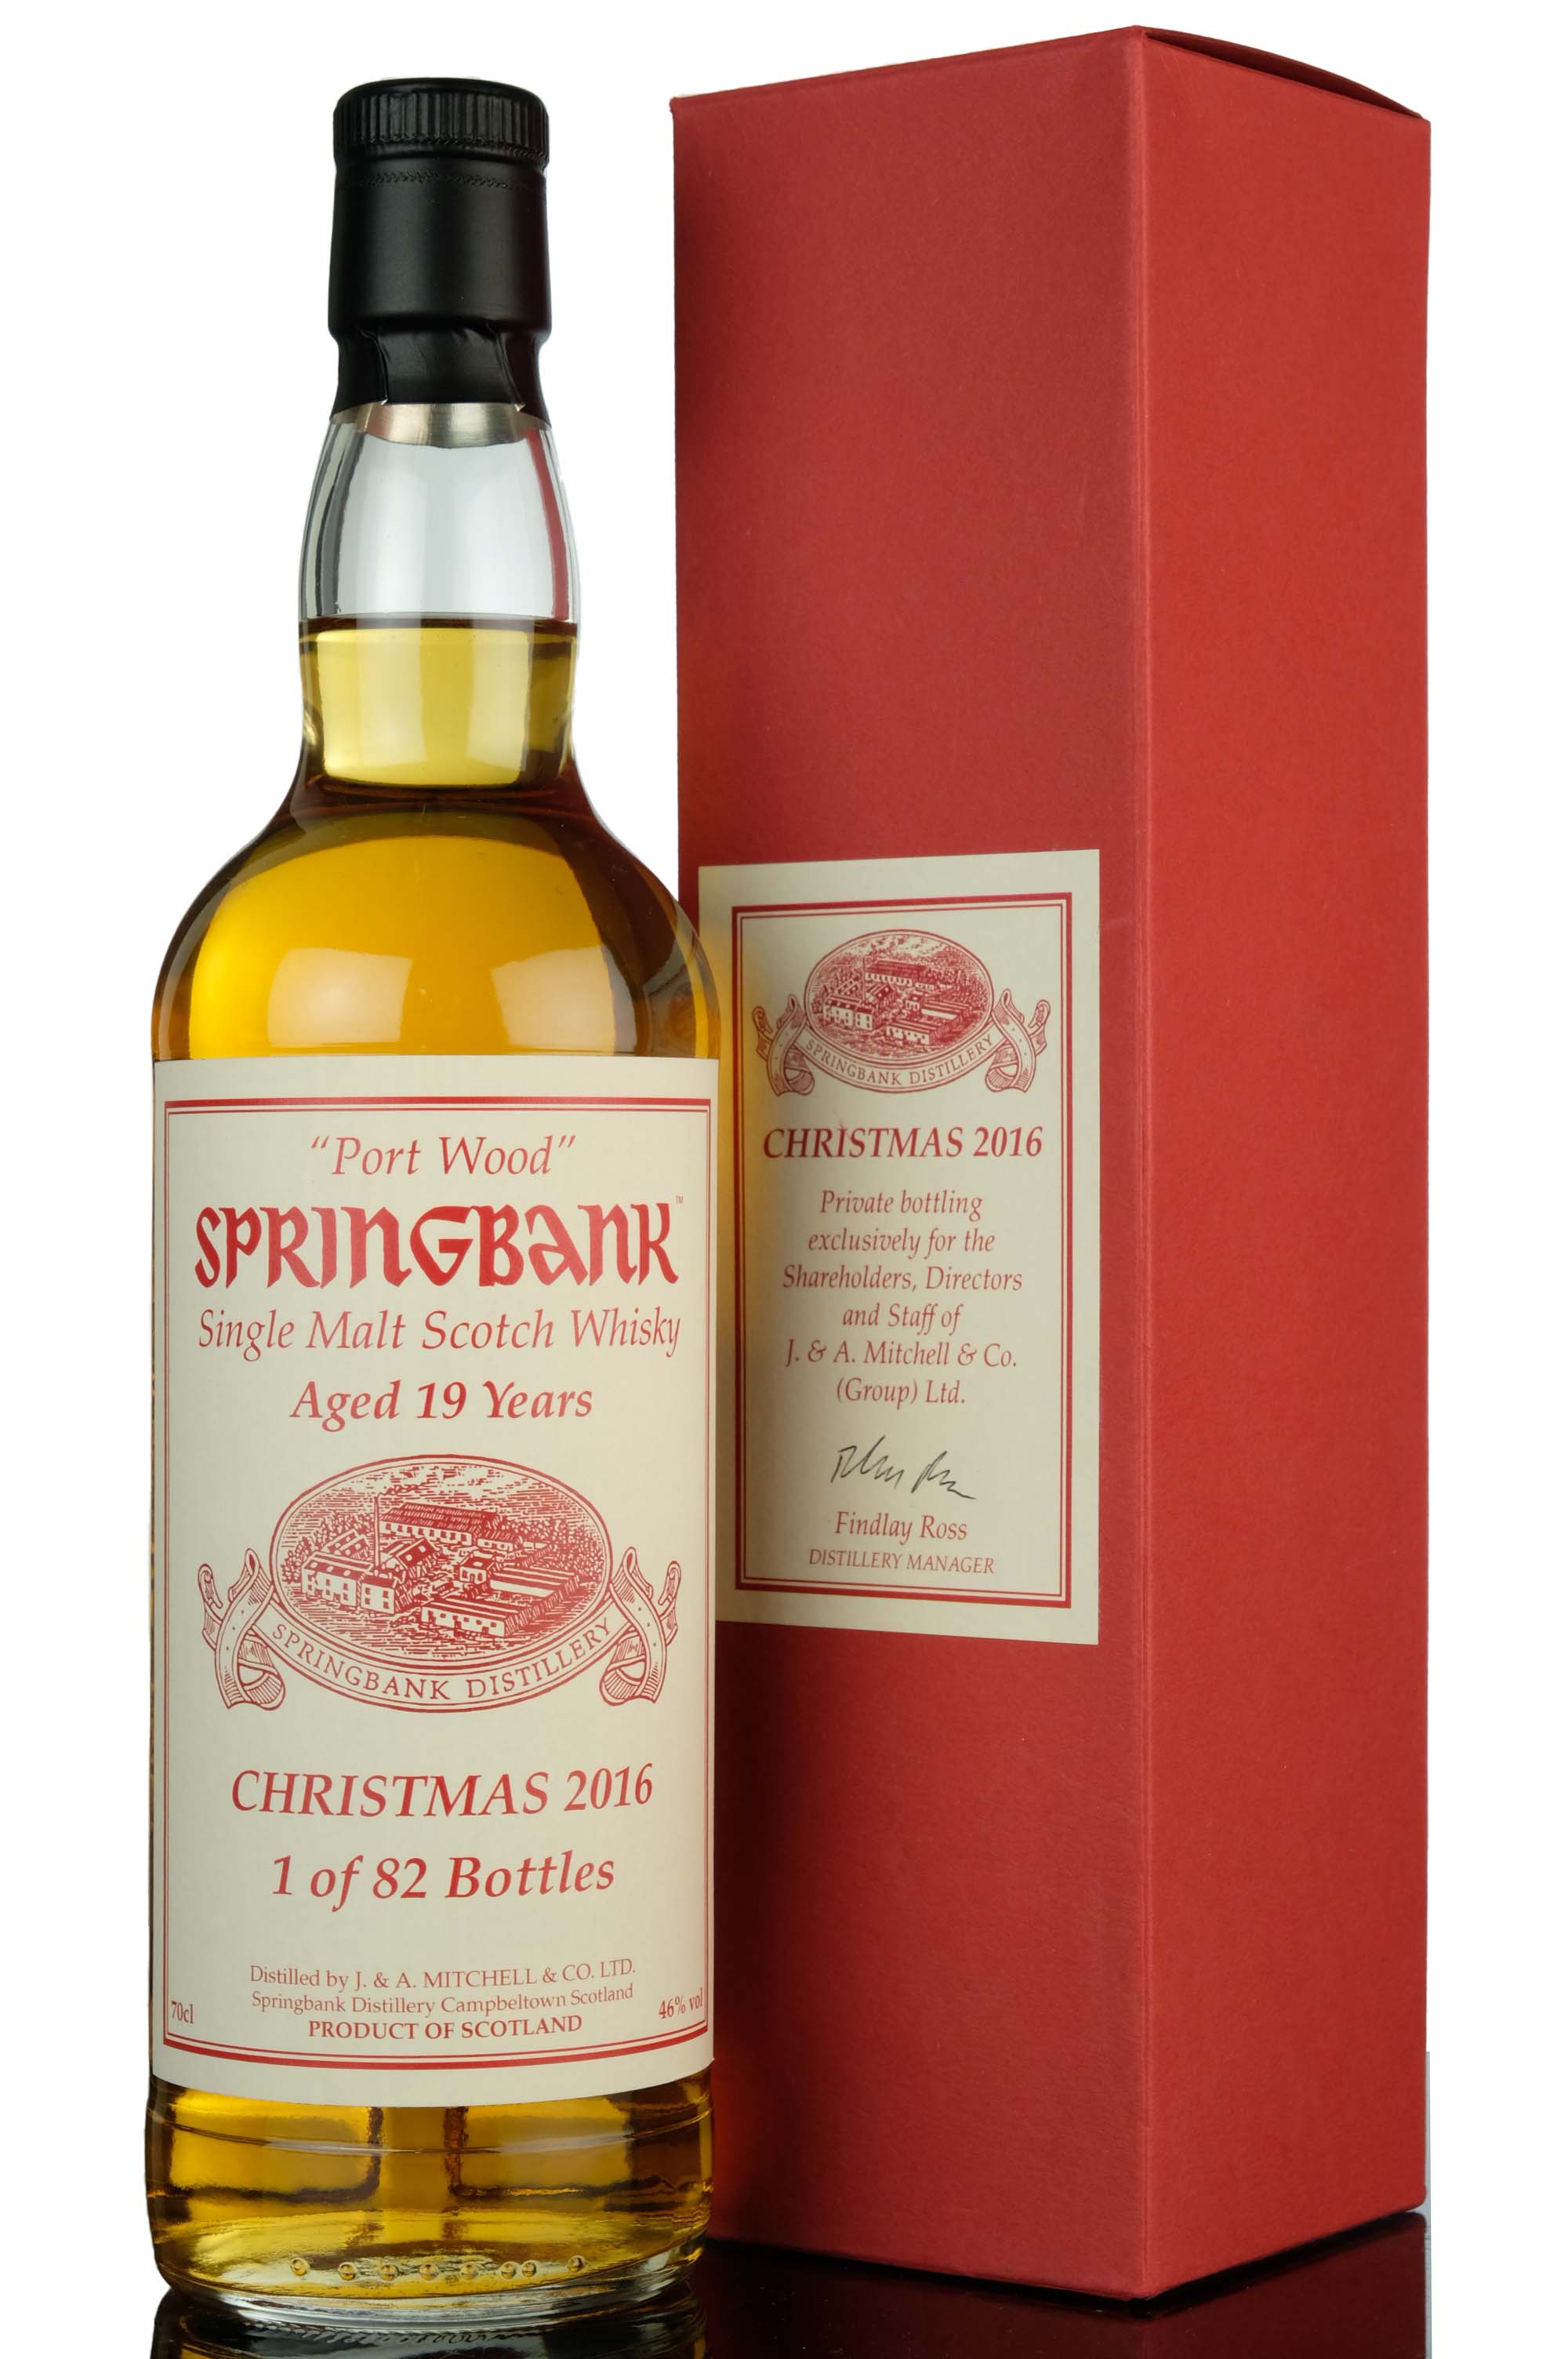 Springbank 19 Year Old - Cadenheads Christmas 2016 - Private Bottling For Shareholders, Di